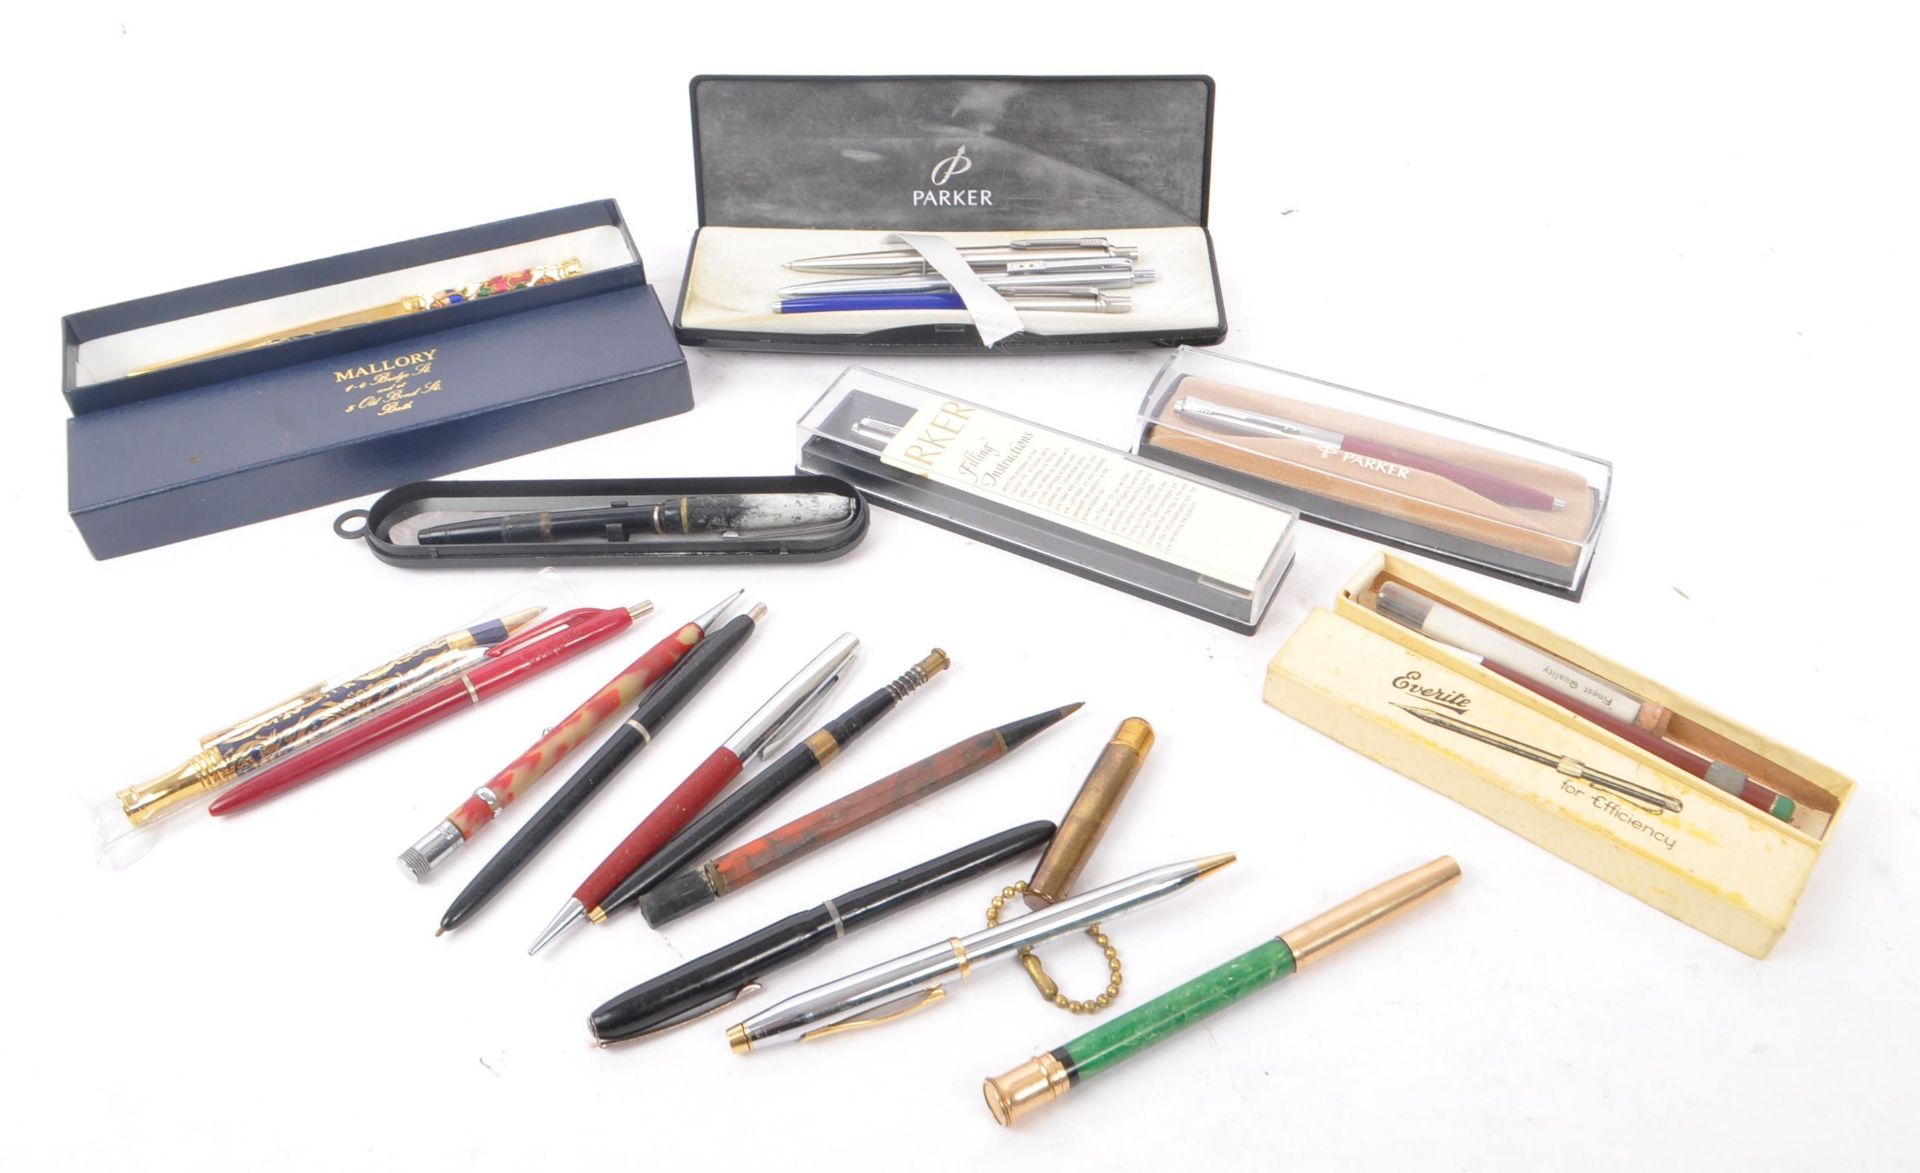 COLLECTION OF 20TH CENTURY PENS AND PENCILS